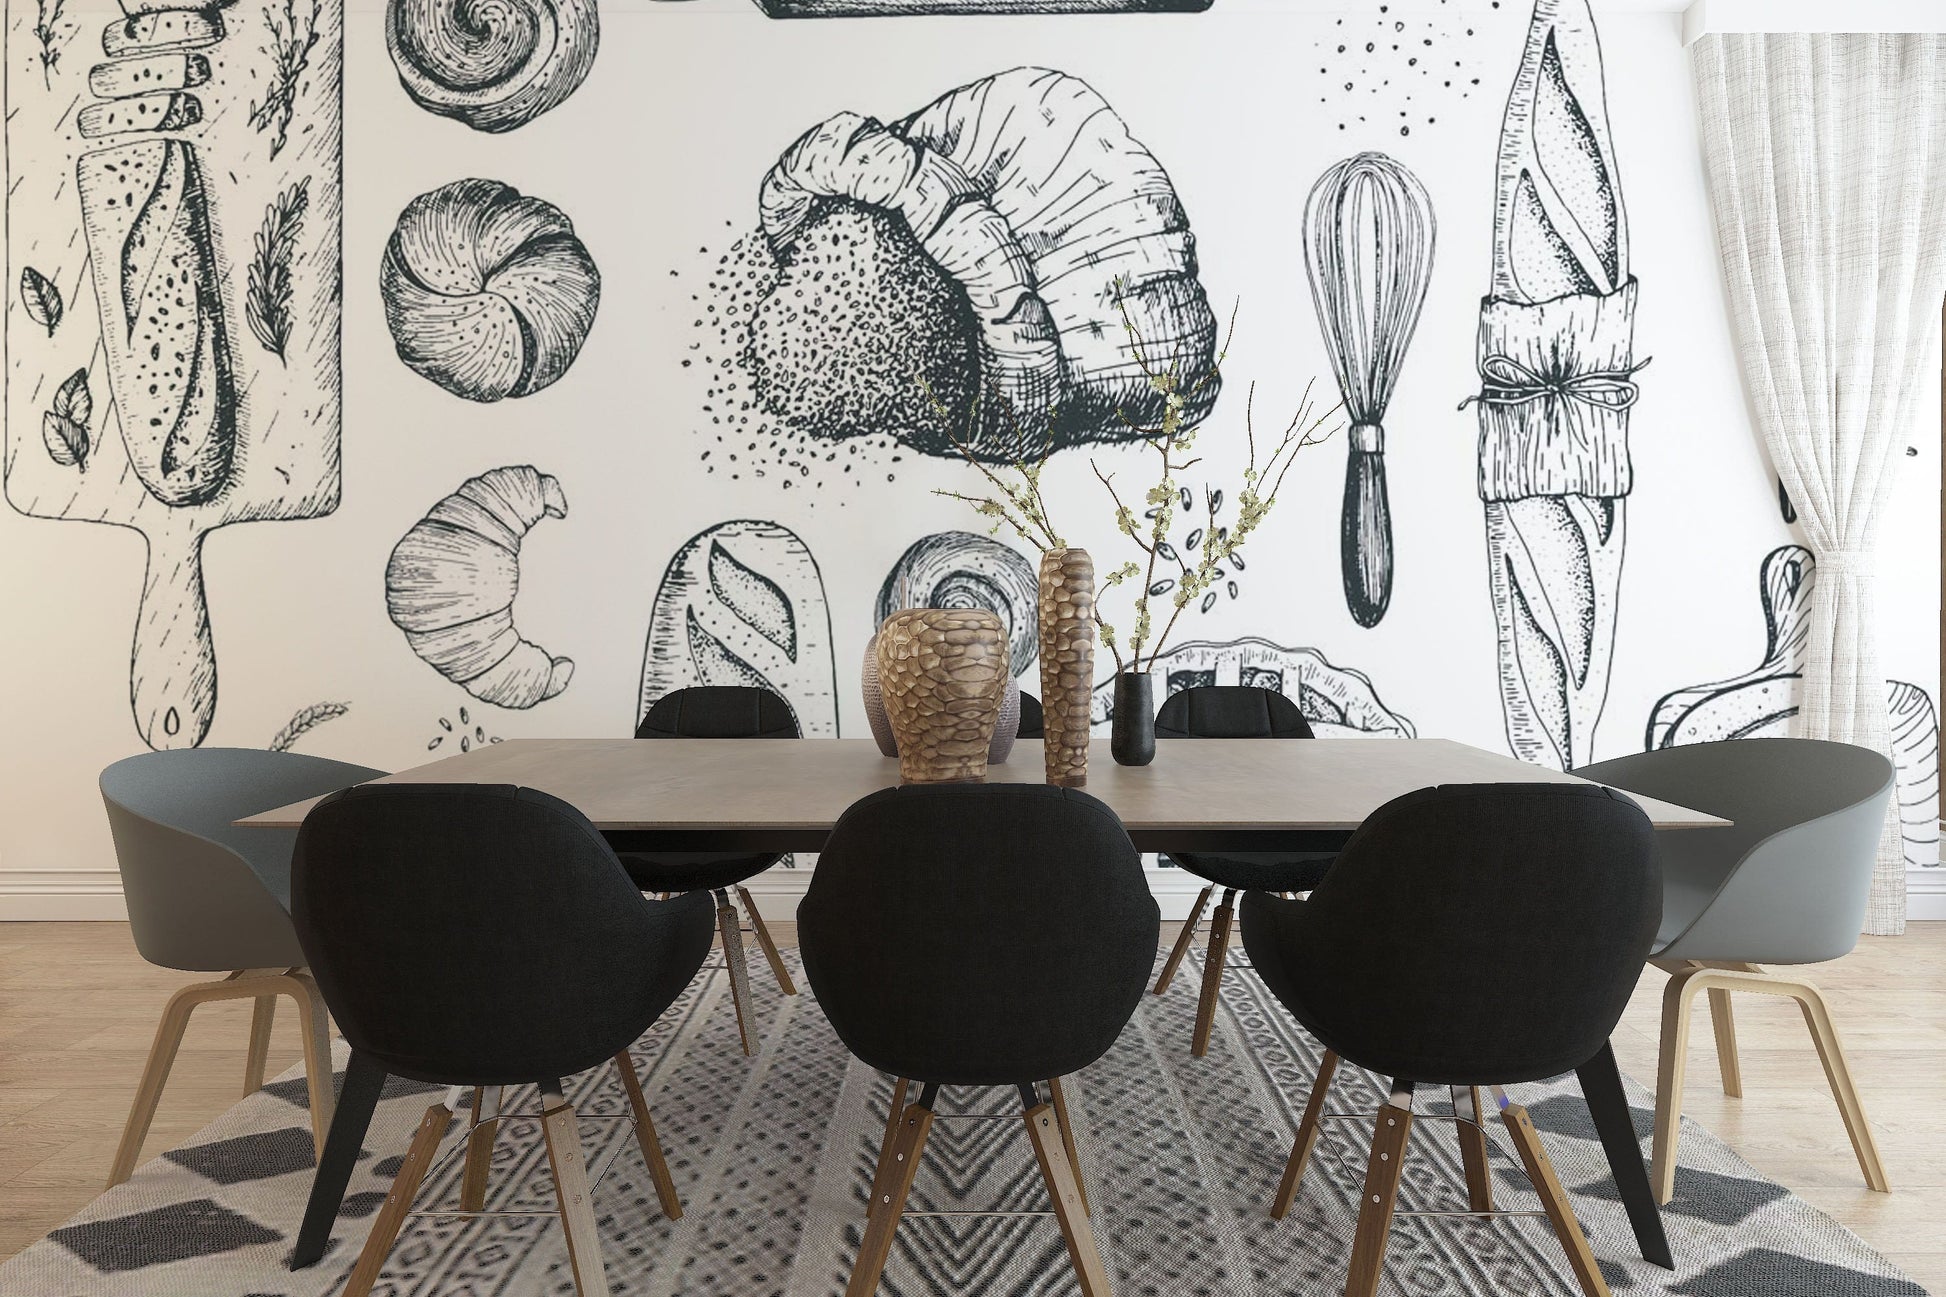 Dining room wallpaper mural with a bread pattern and food.